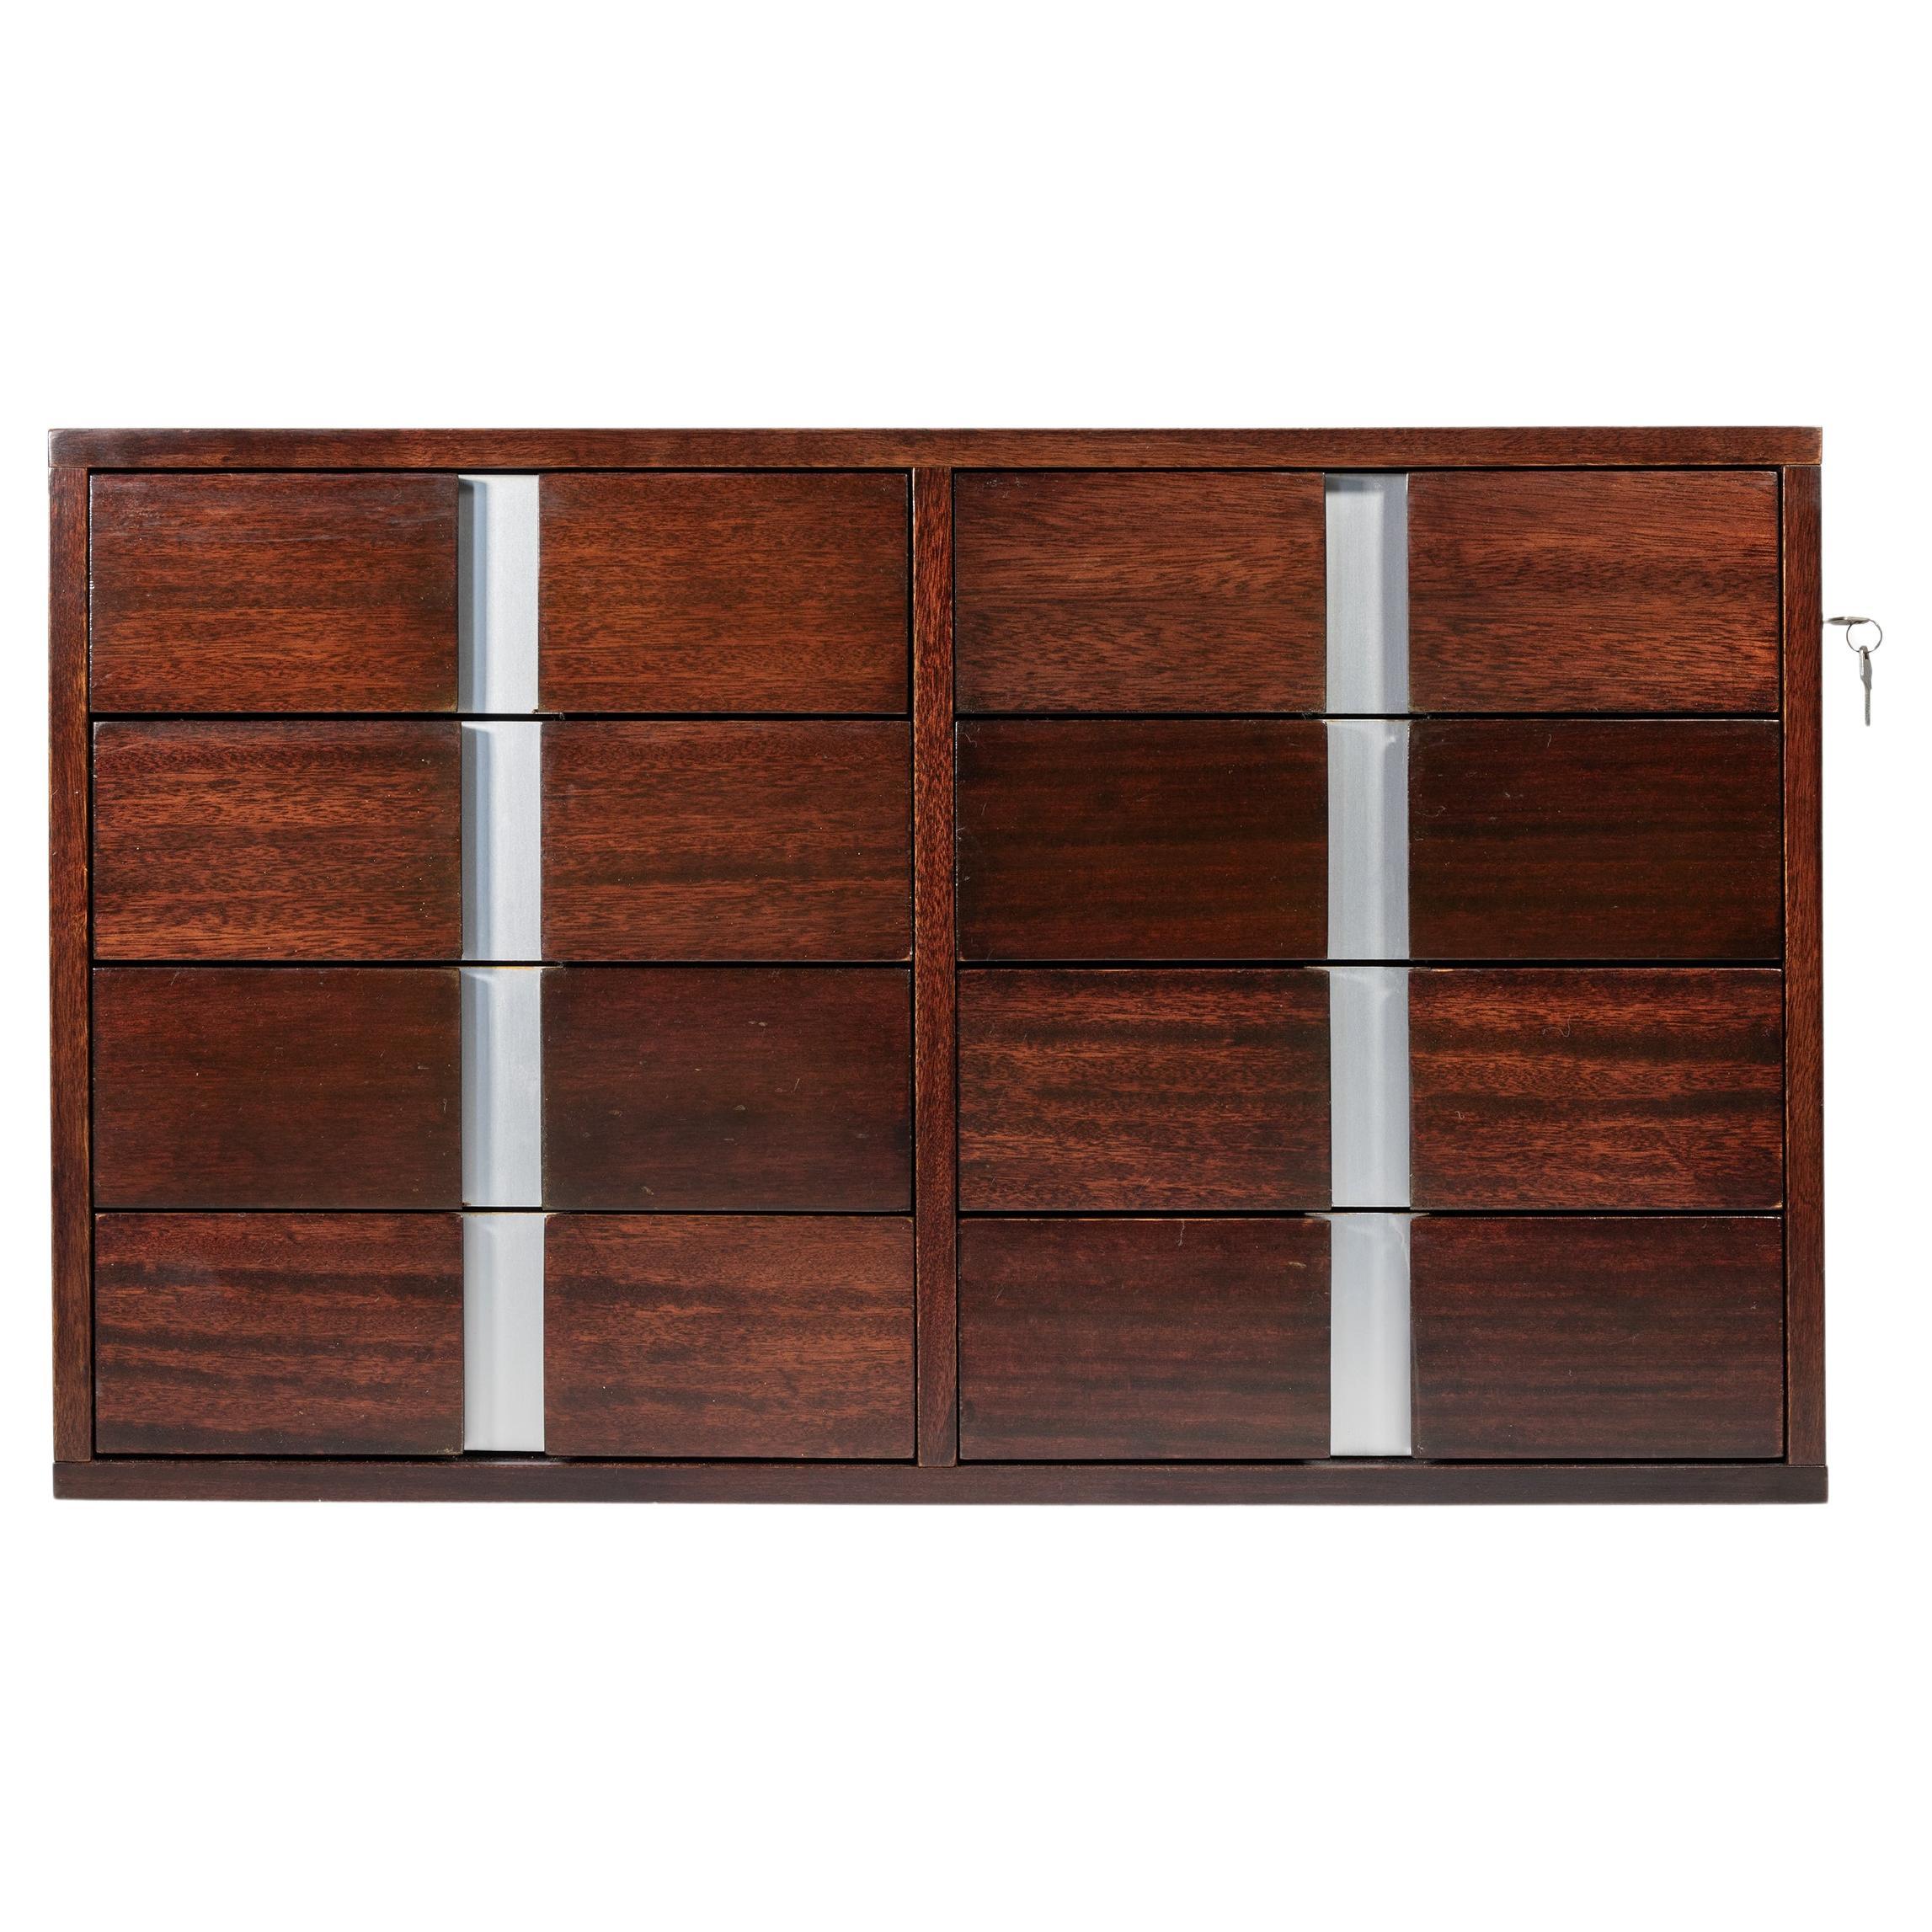 Vintage Sideboard of Eight Drawers by Ico Parisi, Italy, 1970s